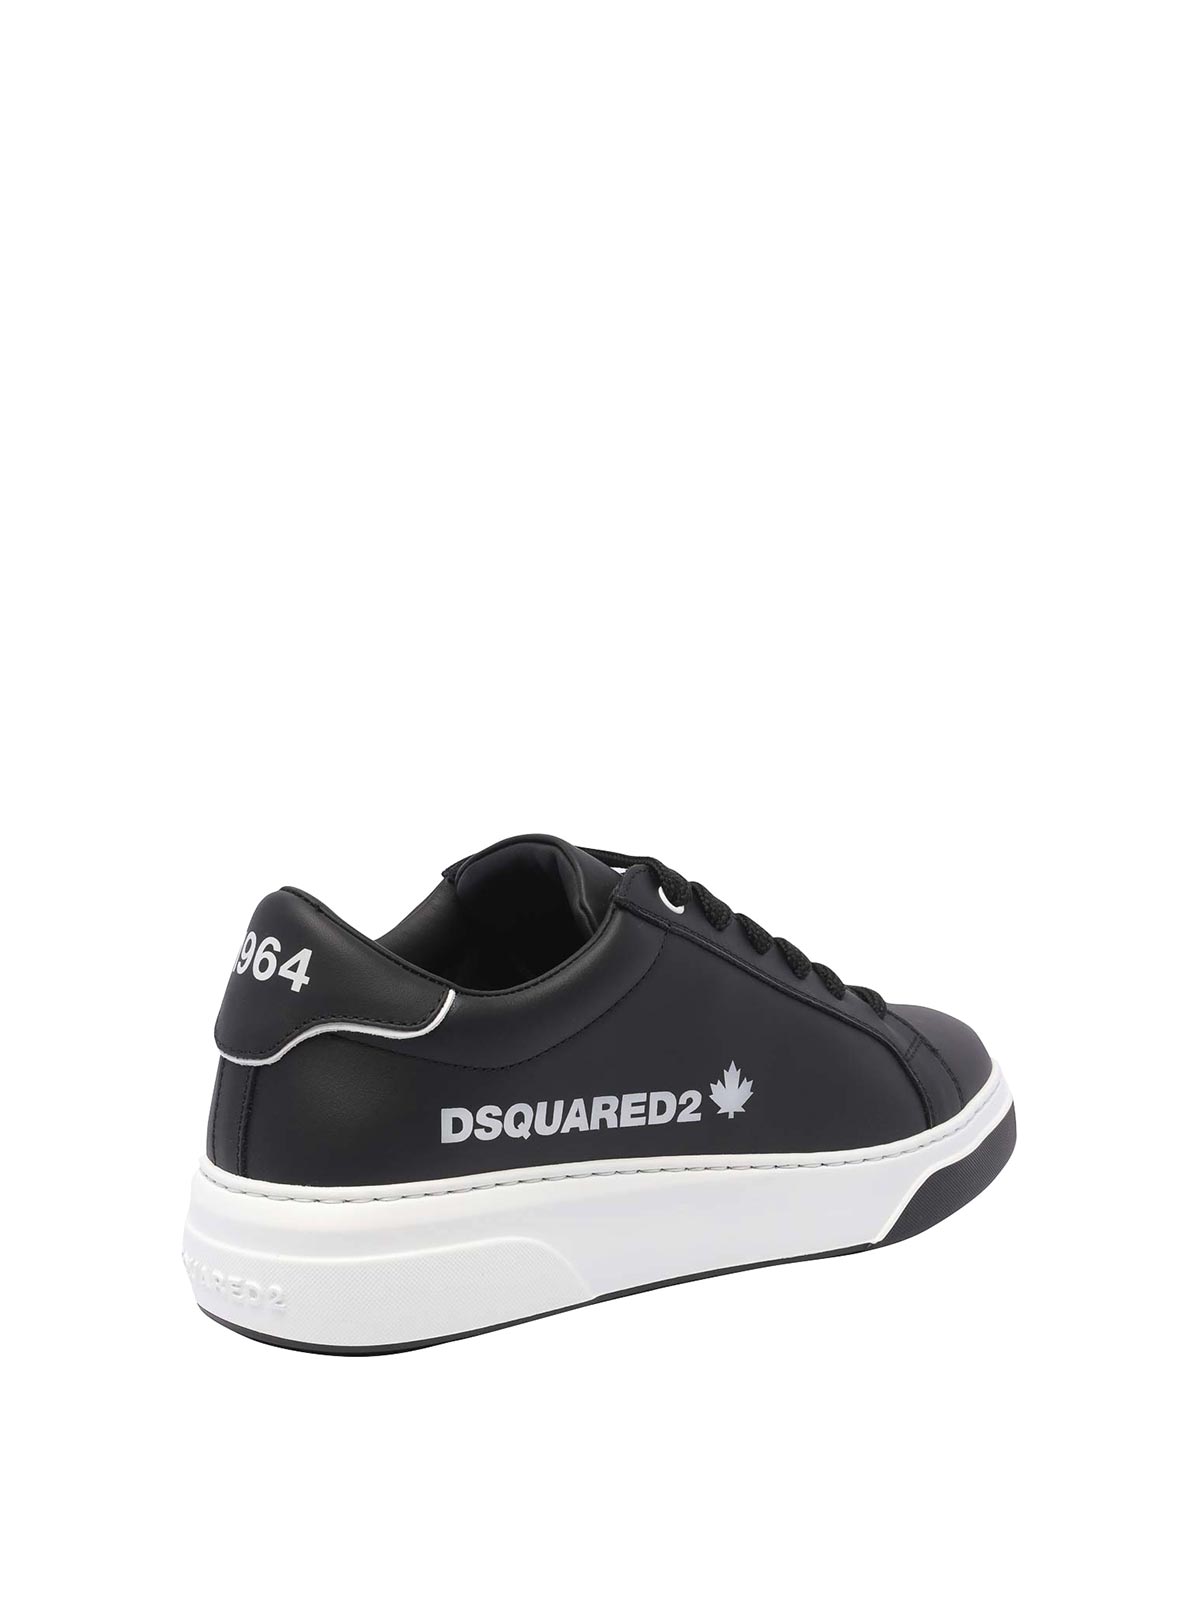 Update more than 73 dsquared2 sneakers black latest